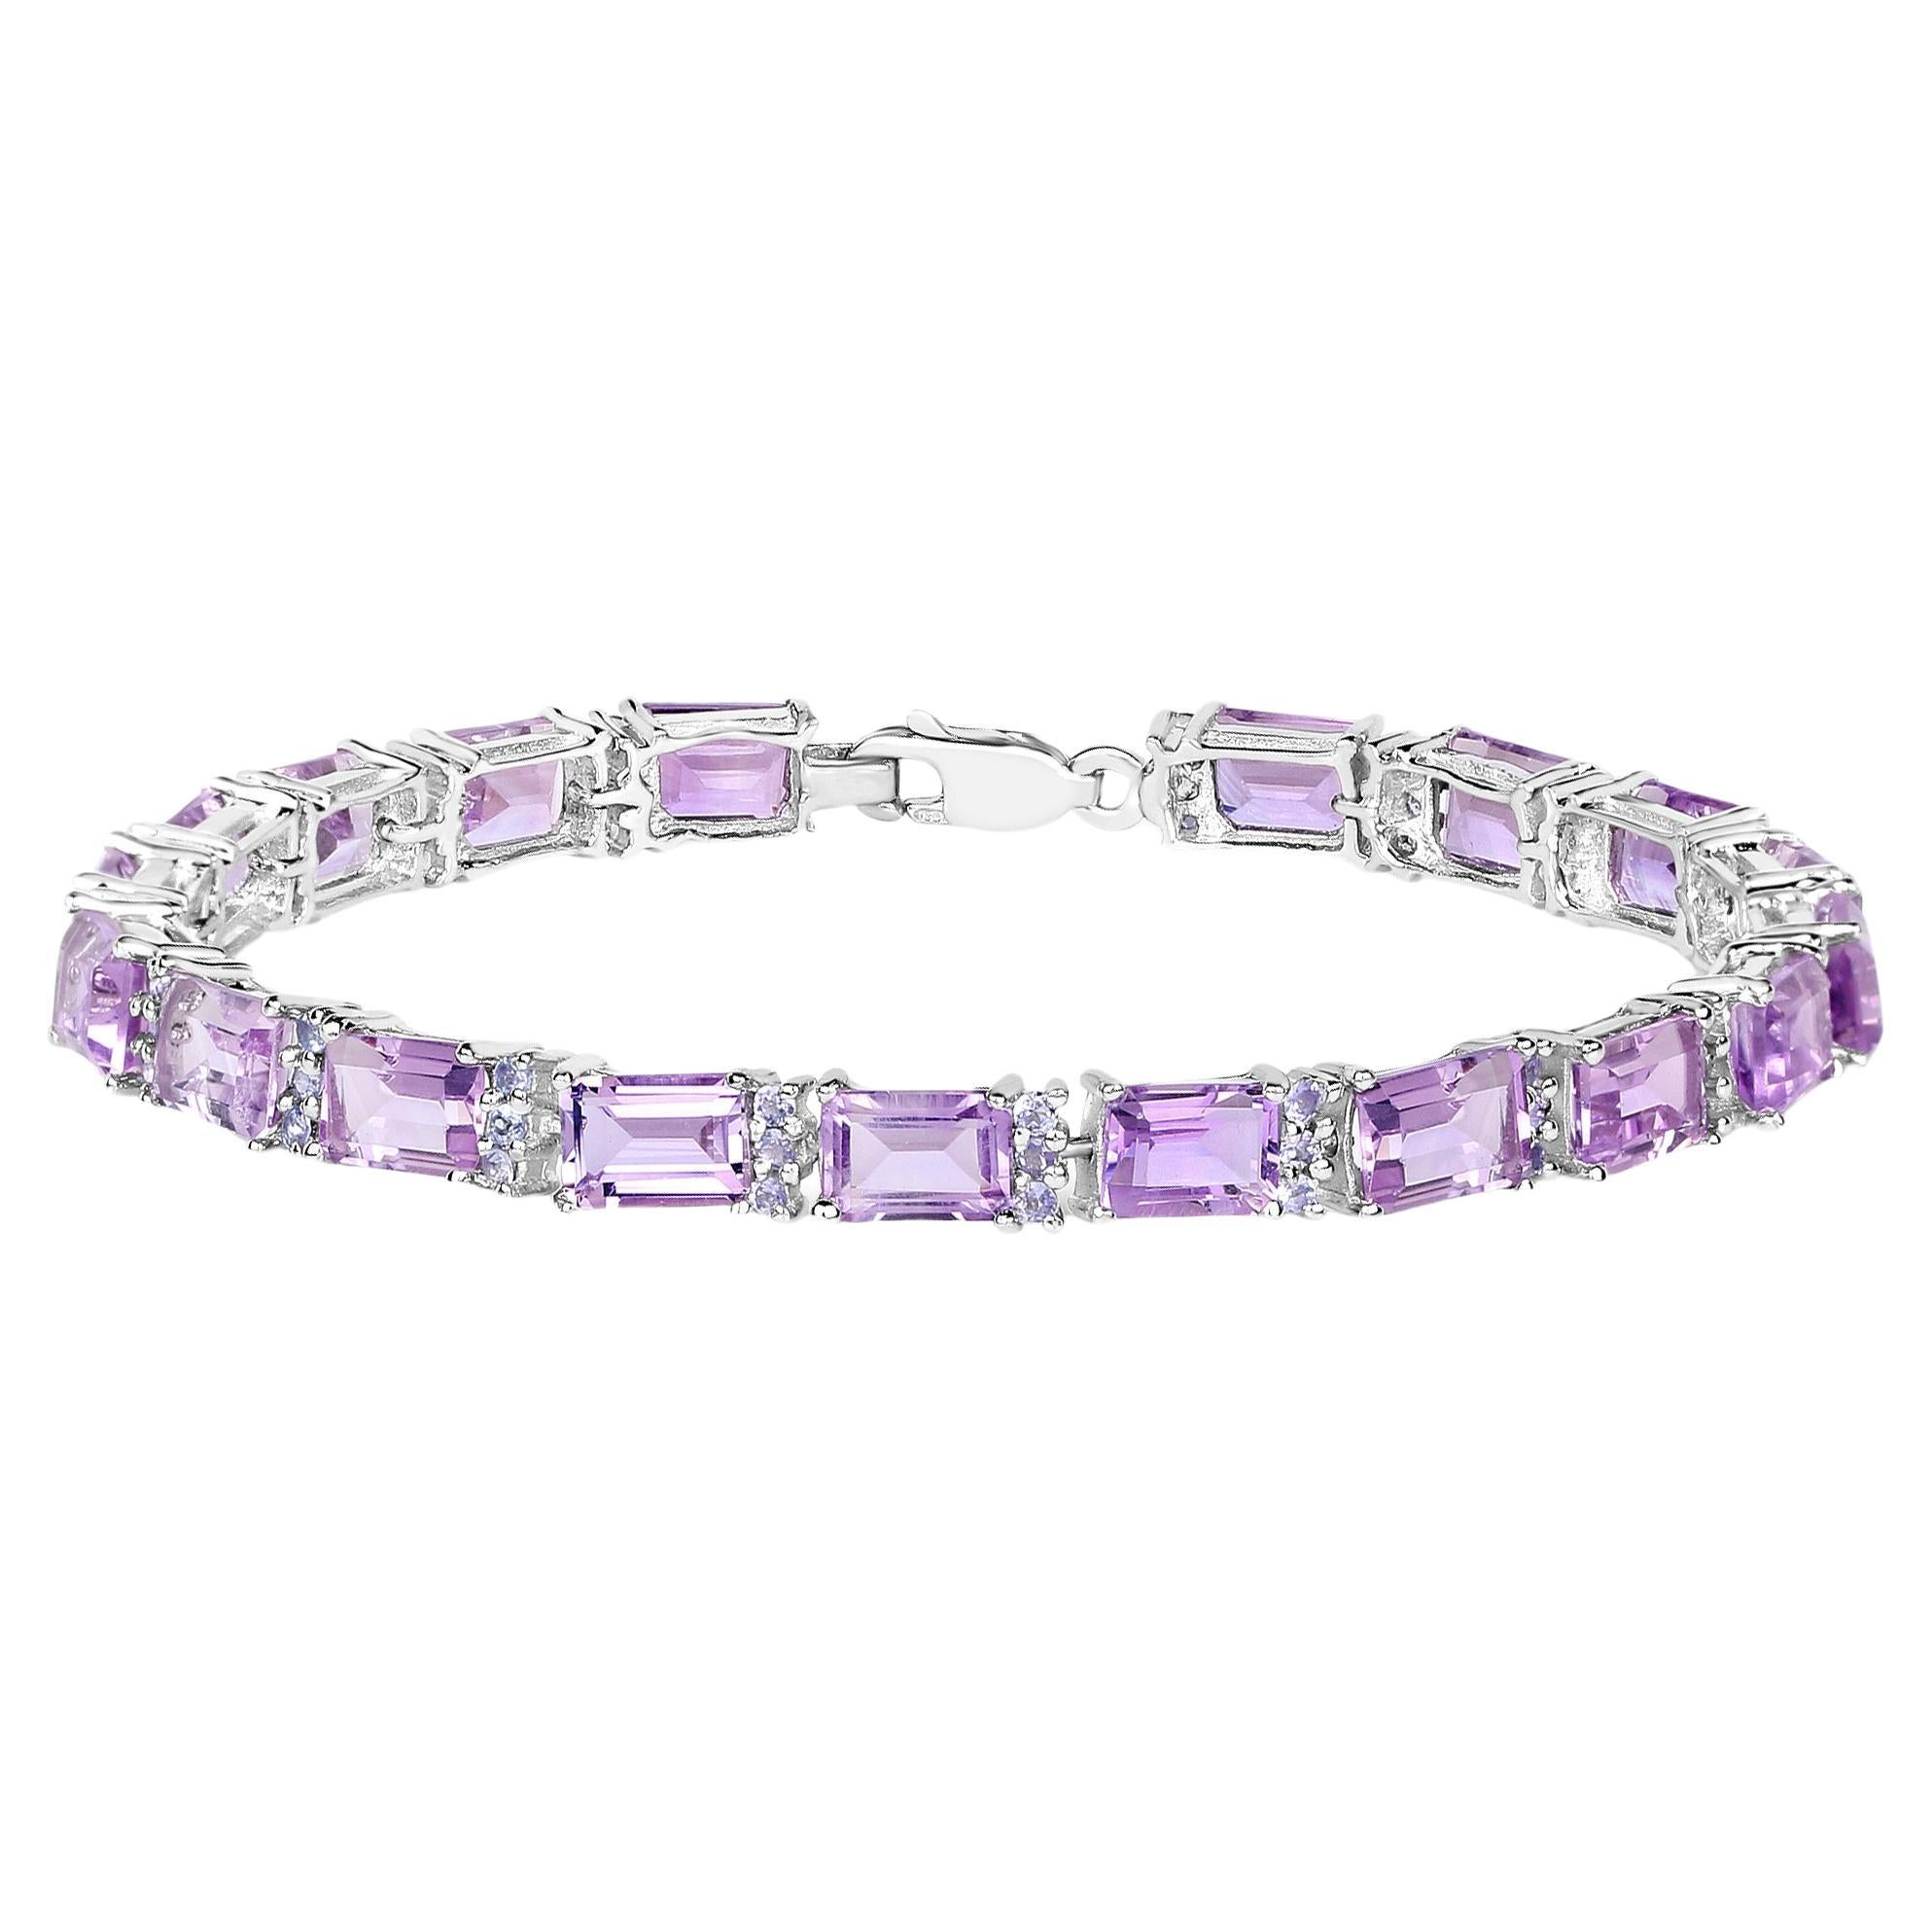 Amethyst Bracelet With Tanzanite 19.19 Carats Rhodium Plated Sterling Silver For Sale